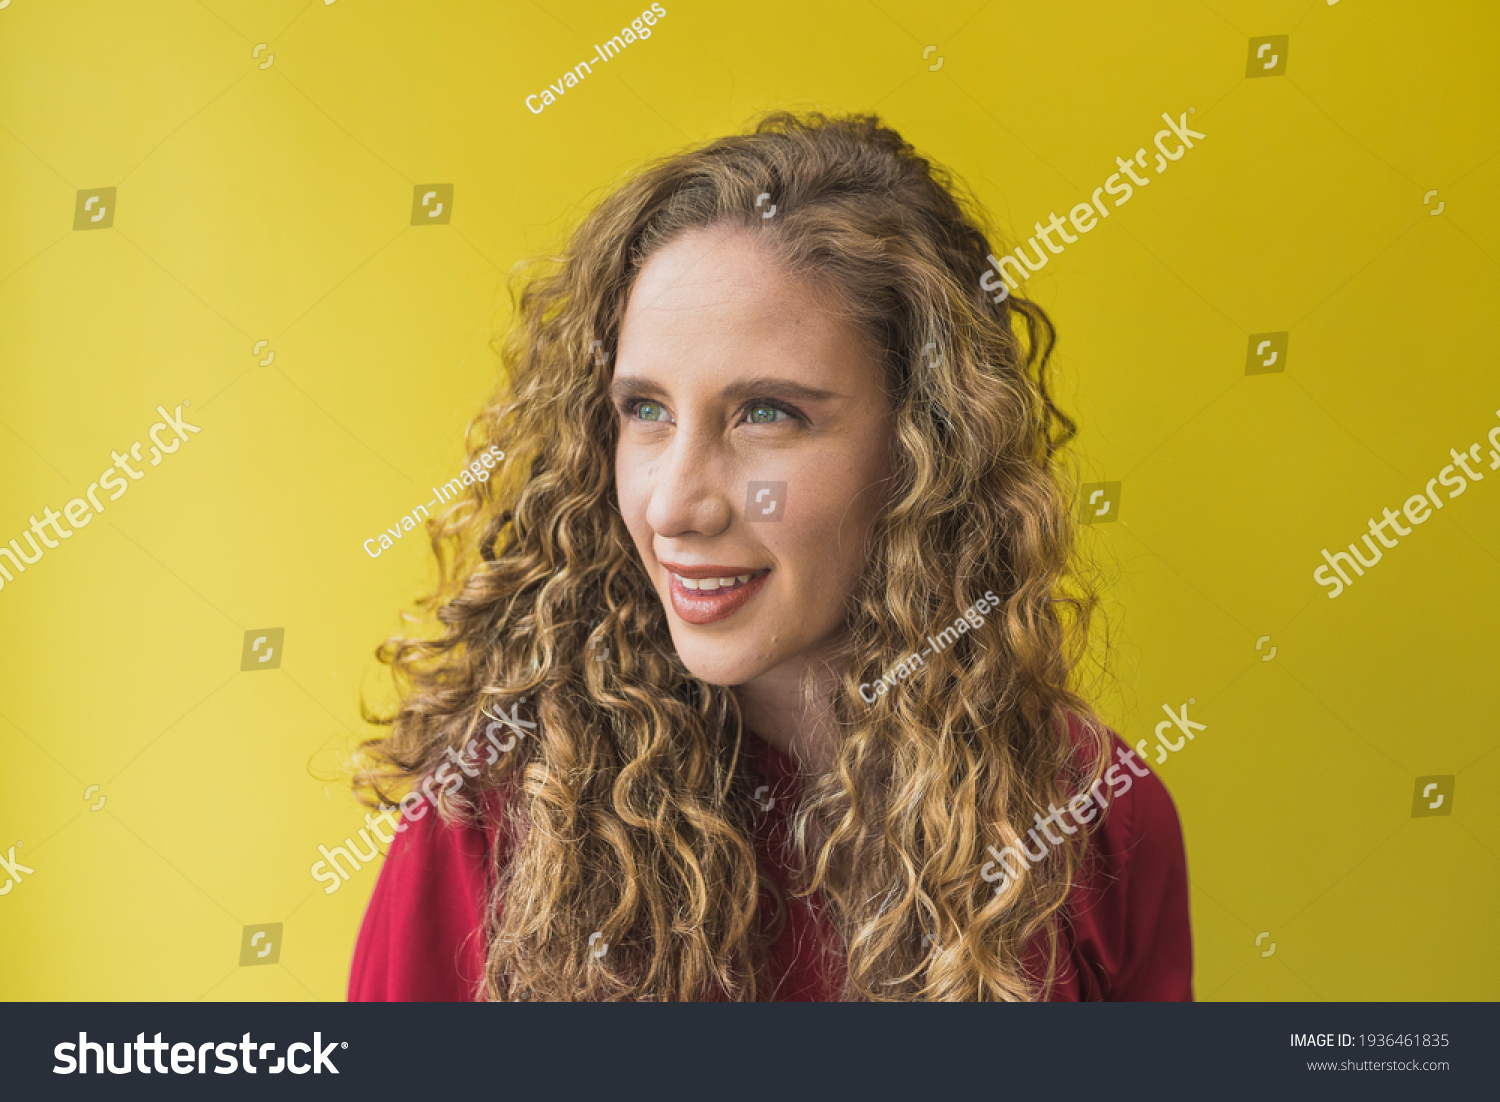 Curly Blonde Hair Illustration - wide 8